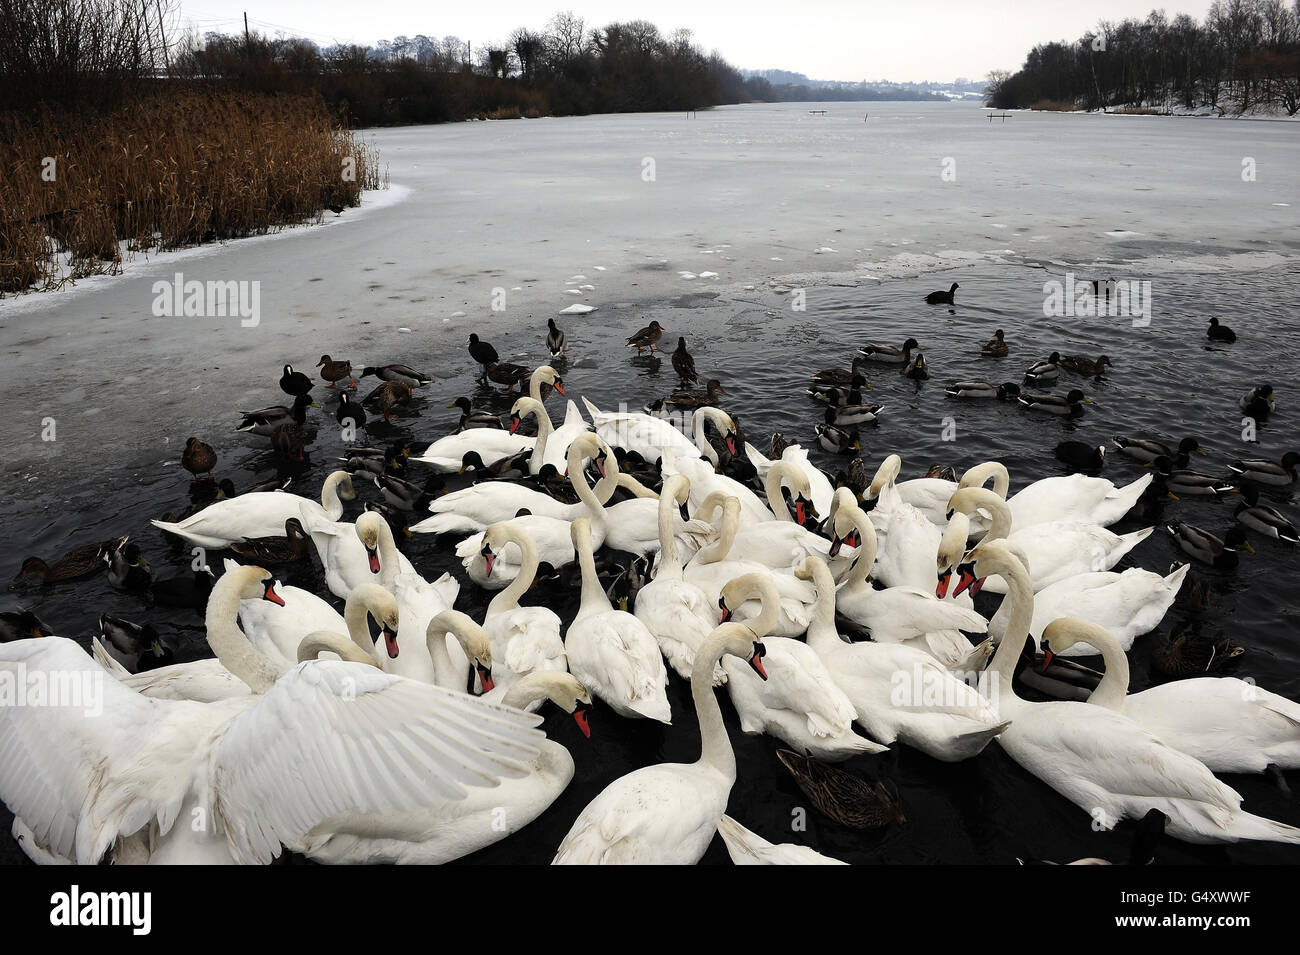 Swans and ducks at the RSPB site in Fairburn Ings near Castleford, West Yorkshire, feed in a small area of open water as most of the lake is frozen as the severe winter weather continues in parts of the UK. Stock Photo